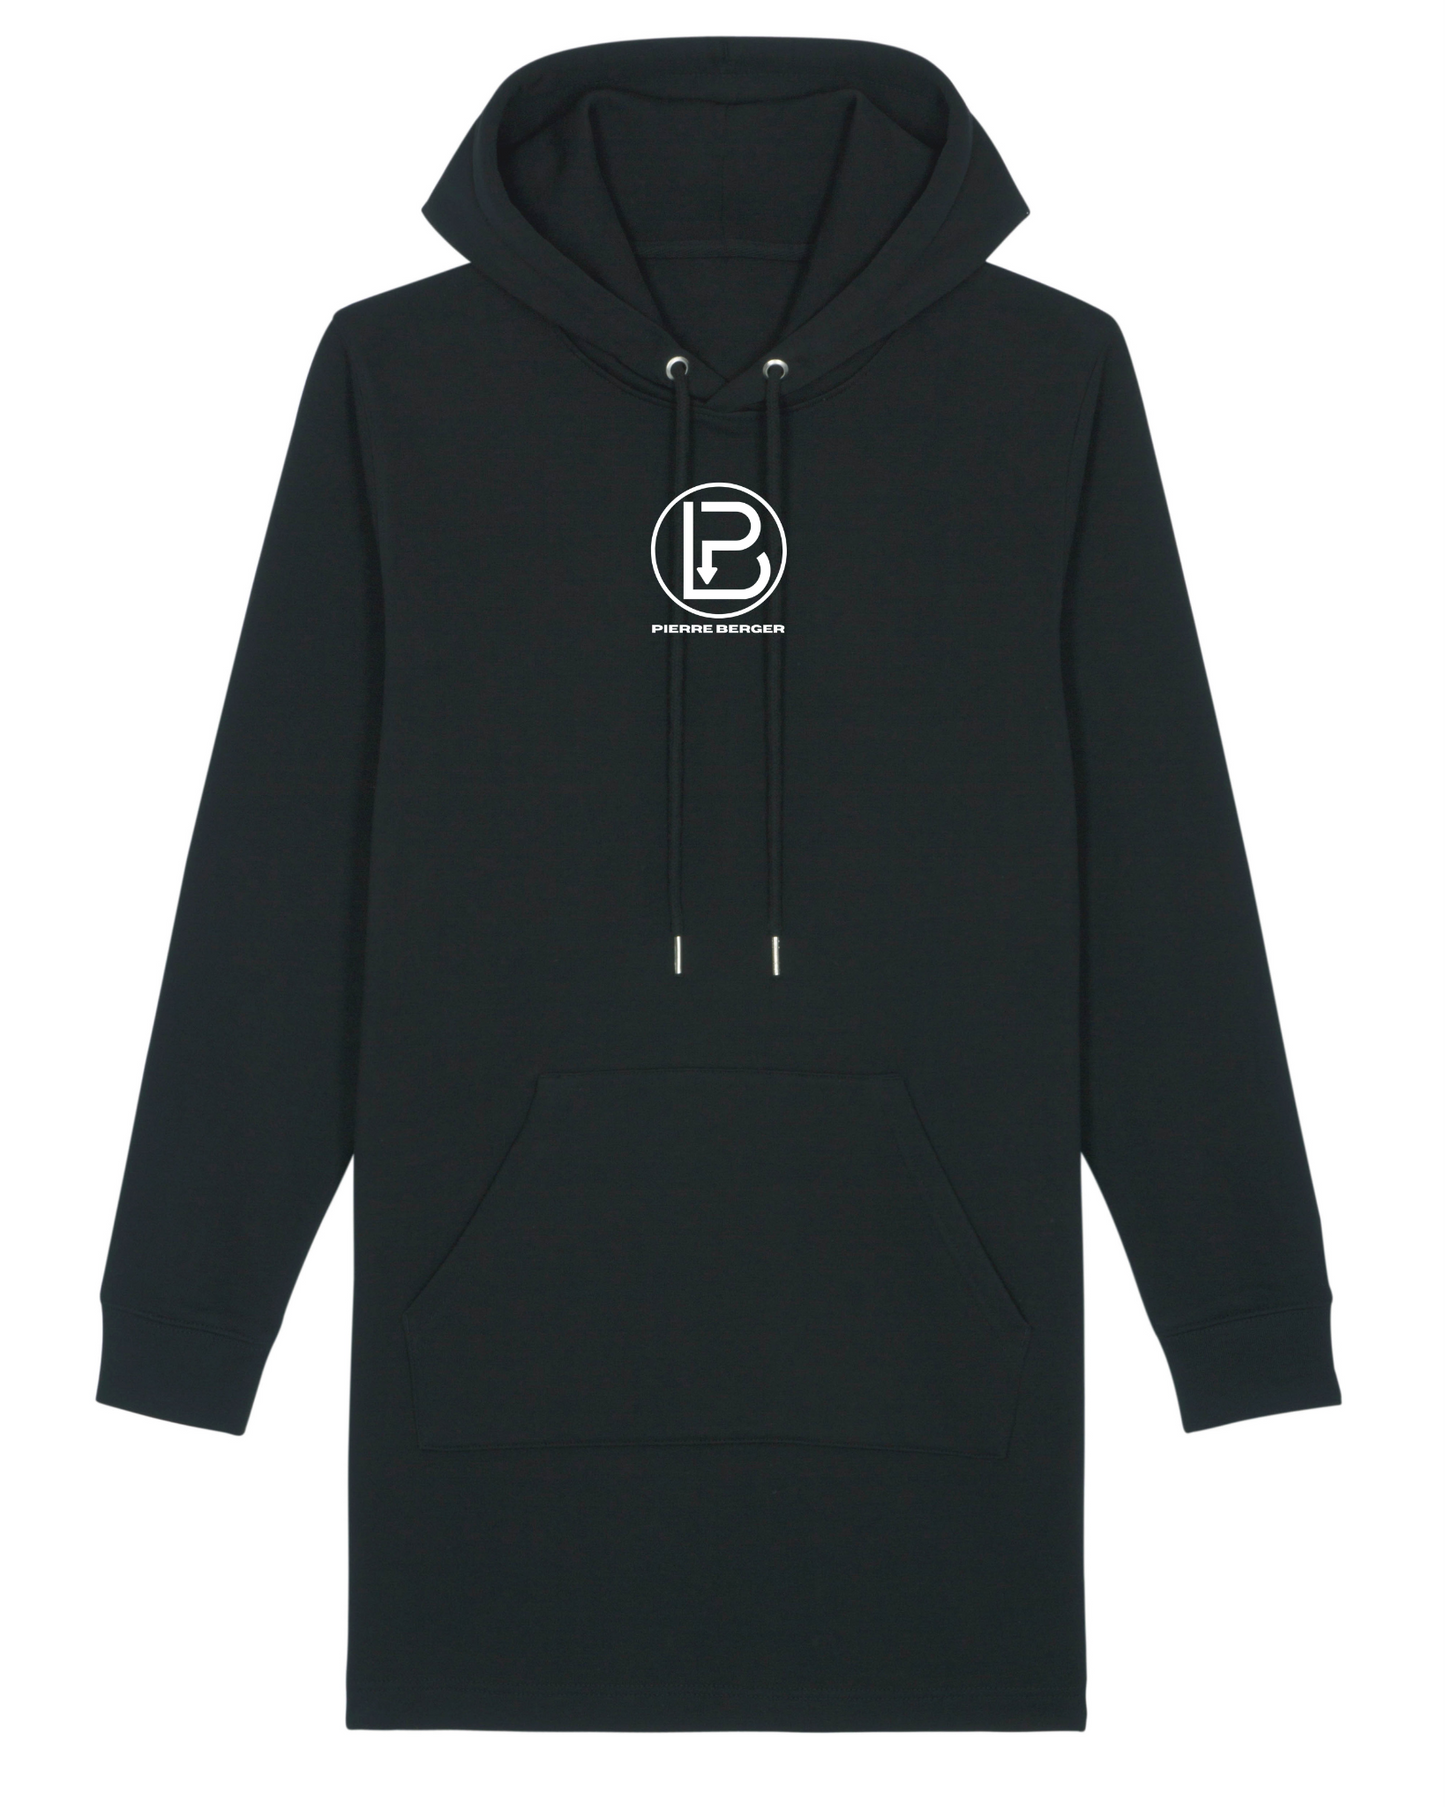 PIERRE BERGER - Hooded sweatshirt dress 100% recycled embroidery